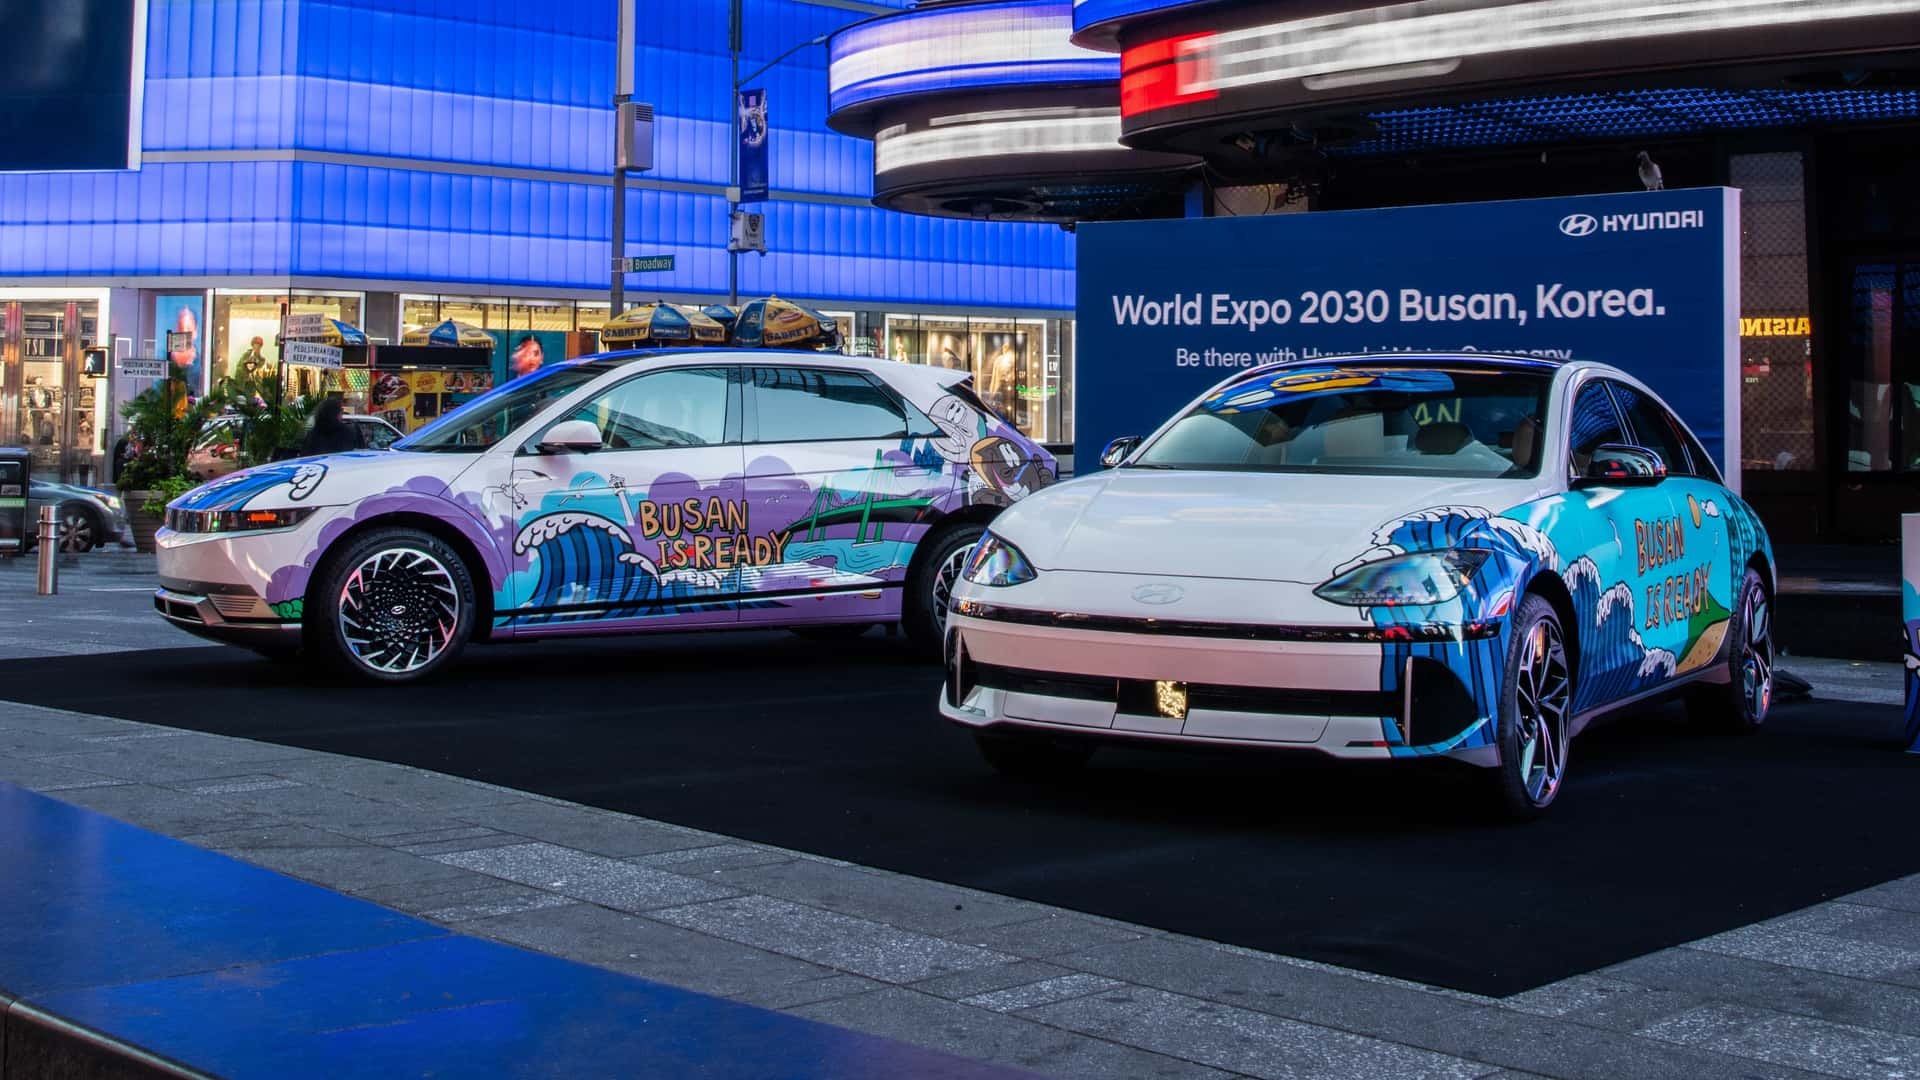 Genesis built several art cars for the upcoming World’s Fair